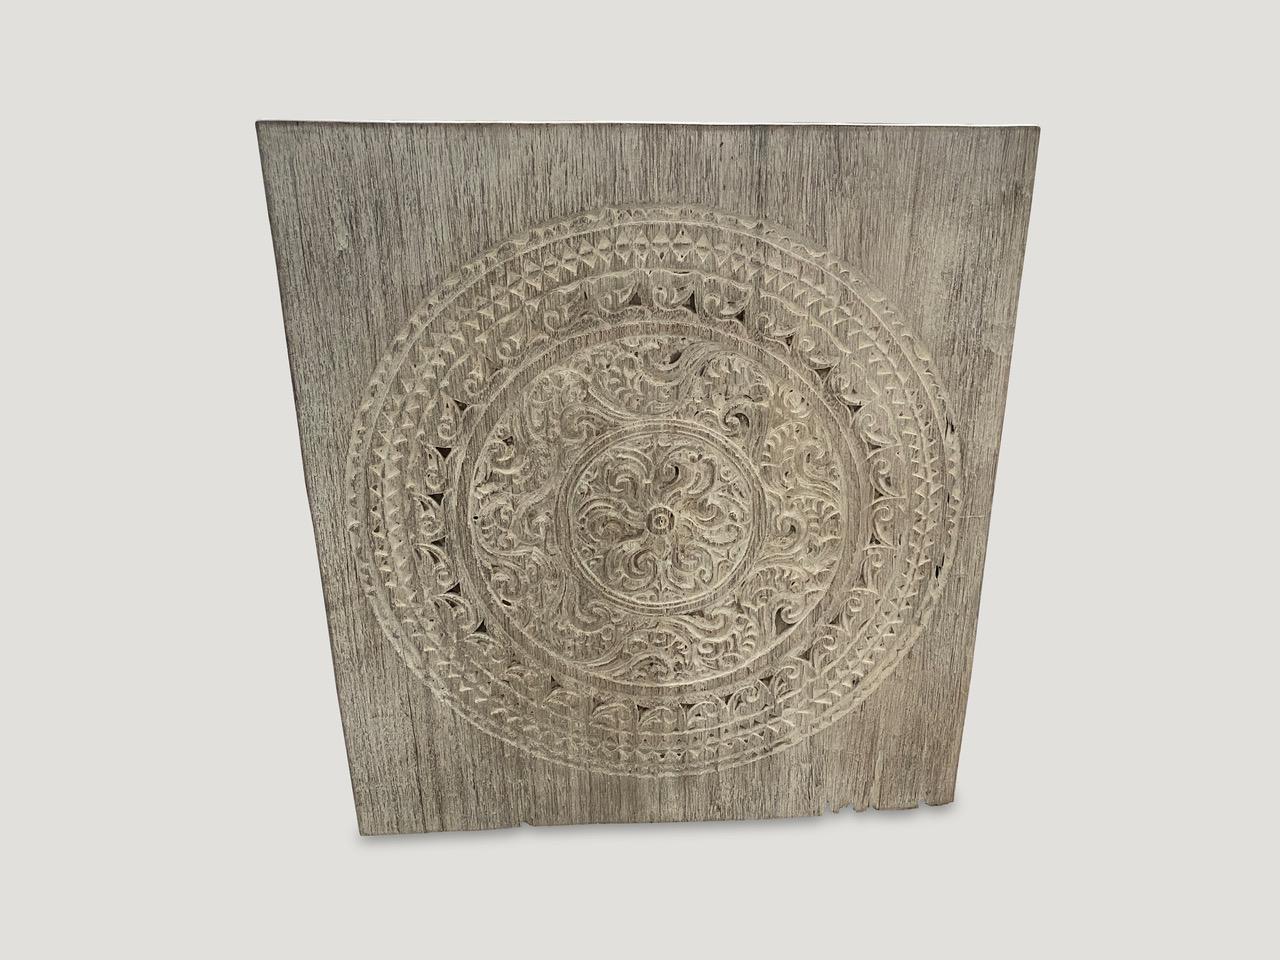 Primitive Andrianna Shamaris Antique White Washed Merbau Wood Carved Panel For Sale